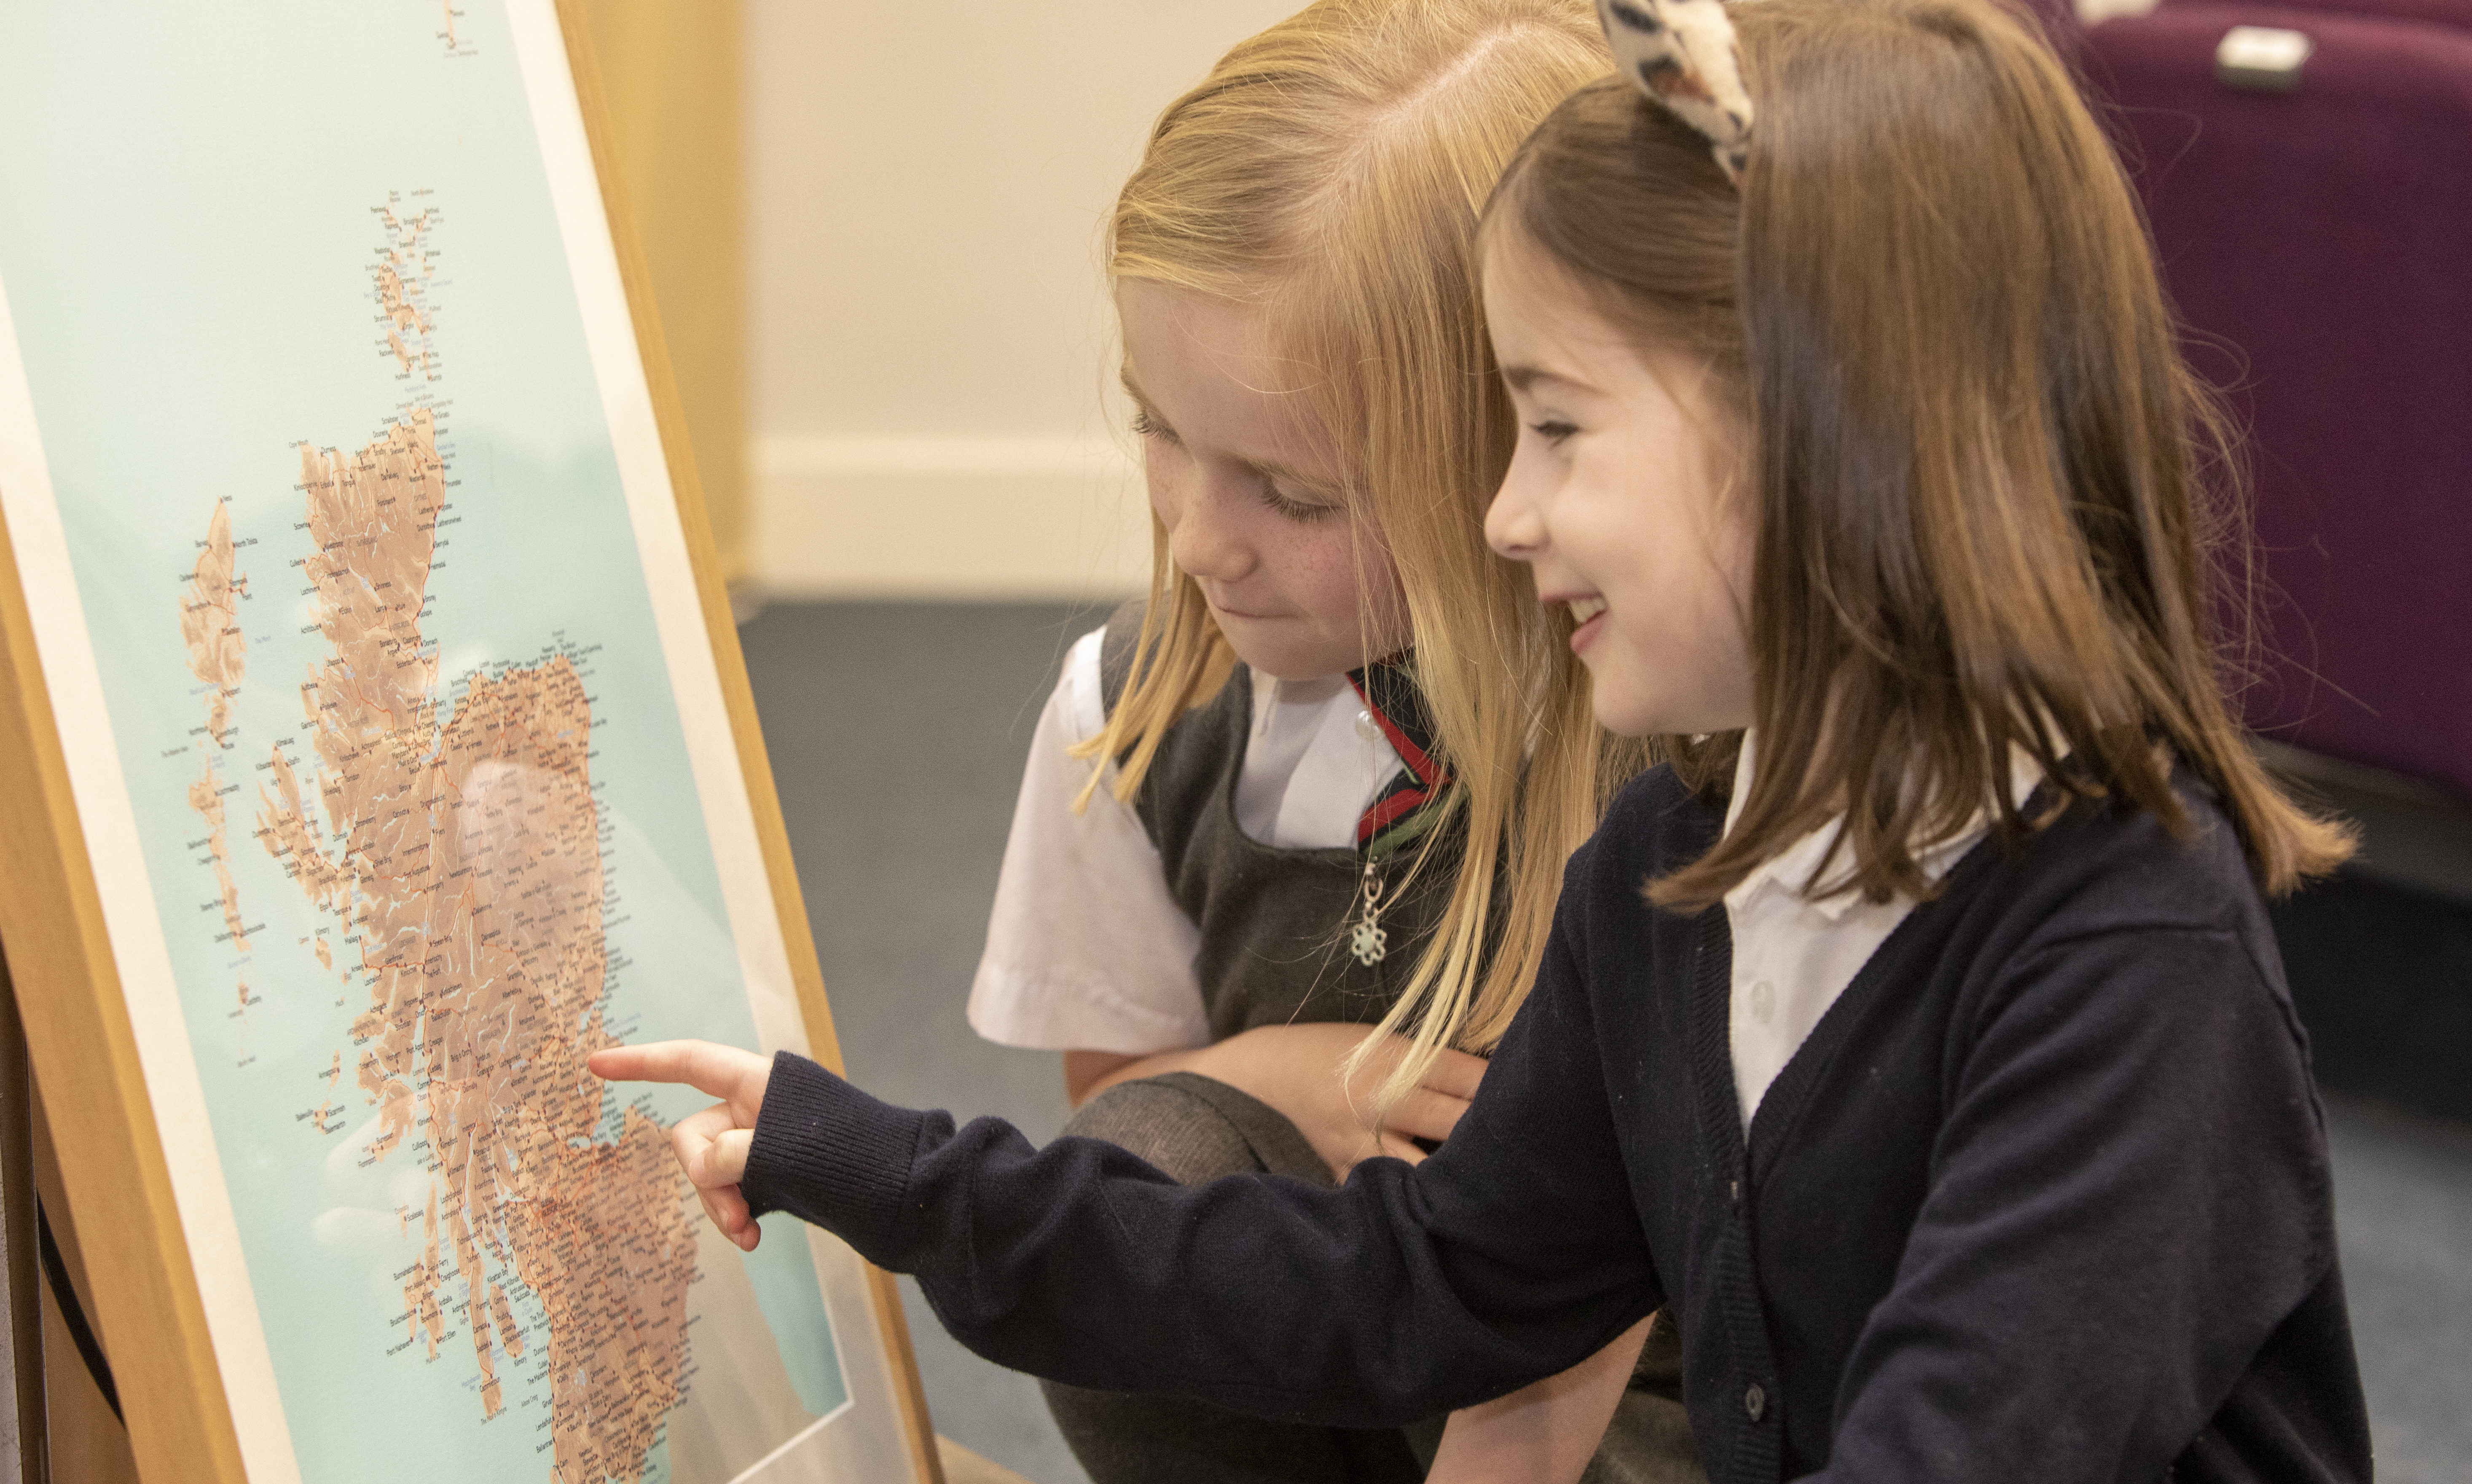 Pupils from RDM Primary School get acquainted with the map.